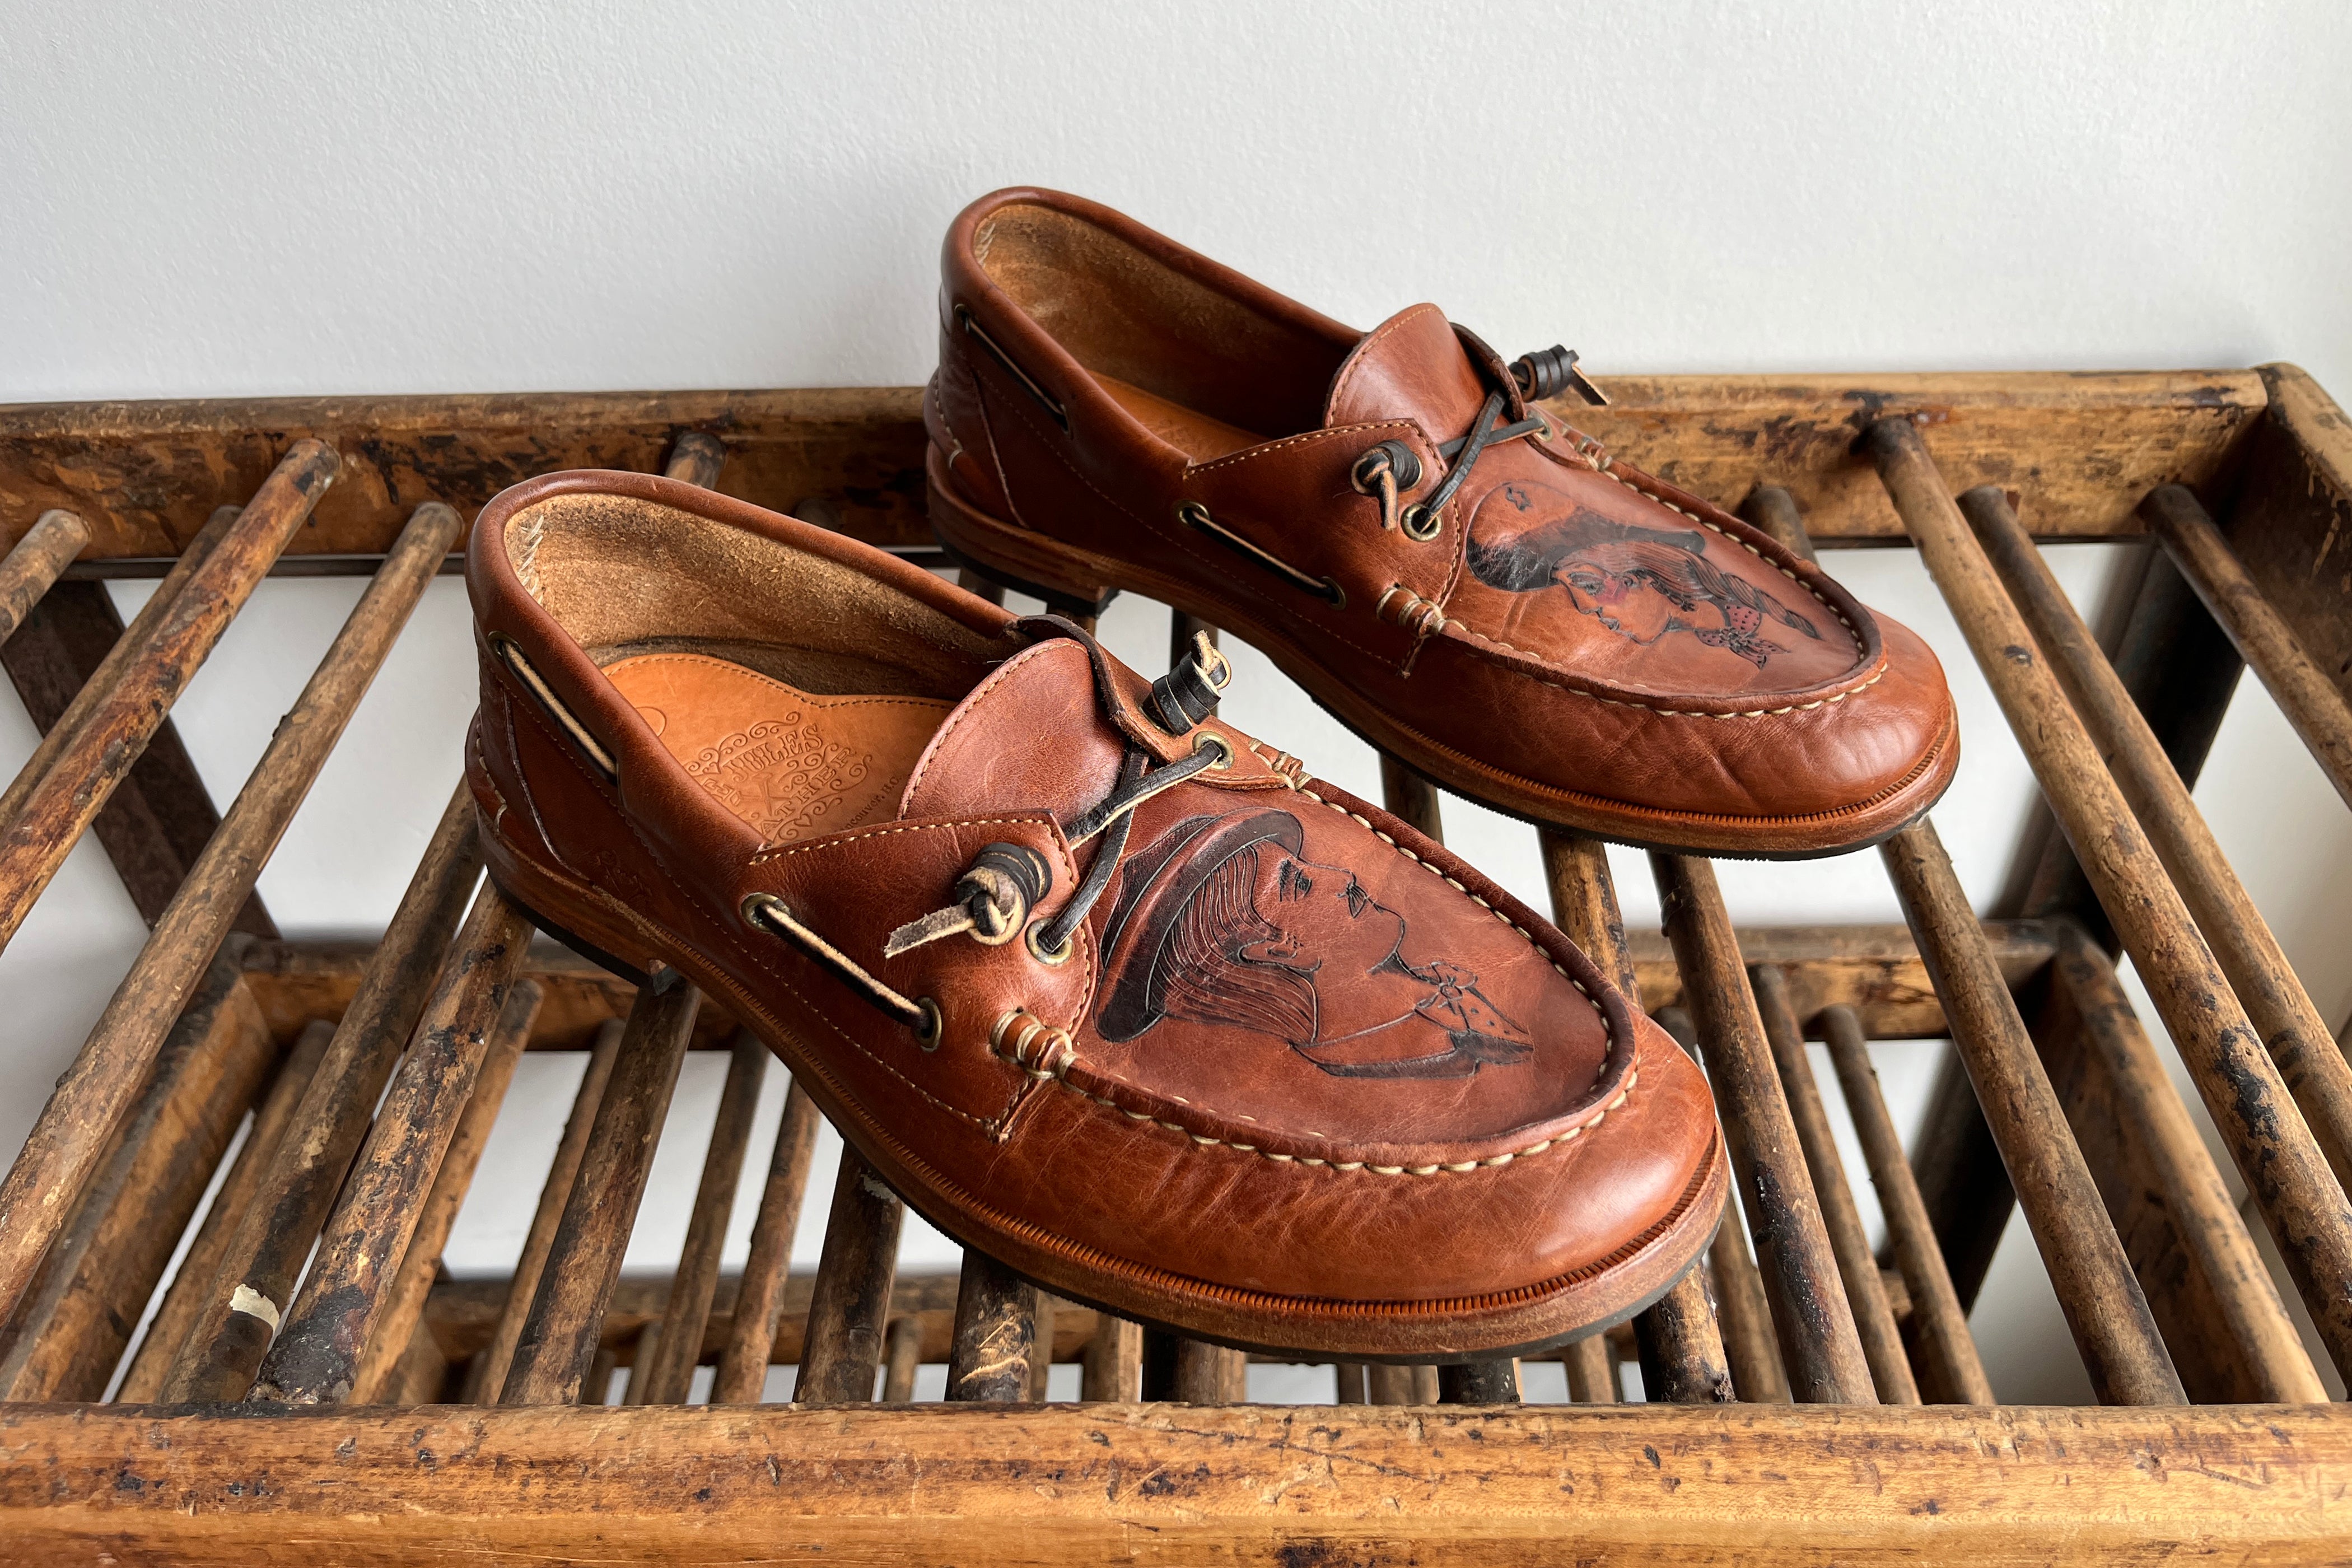 Boat Shoes - ANNIE & FRANK - PRELOVED